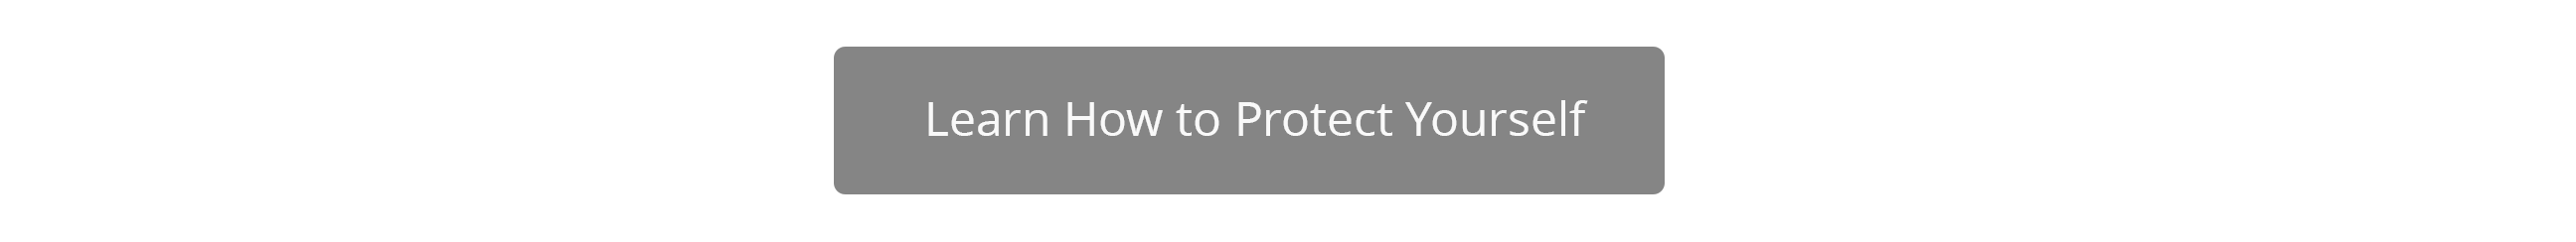 Learn How to Protect Yourself